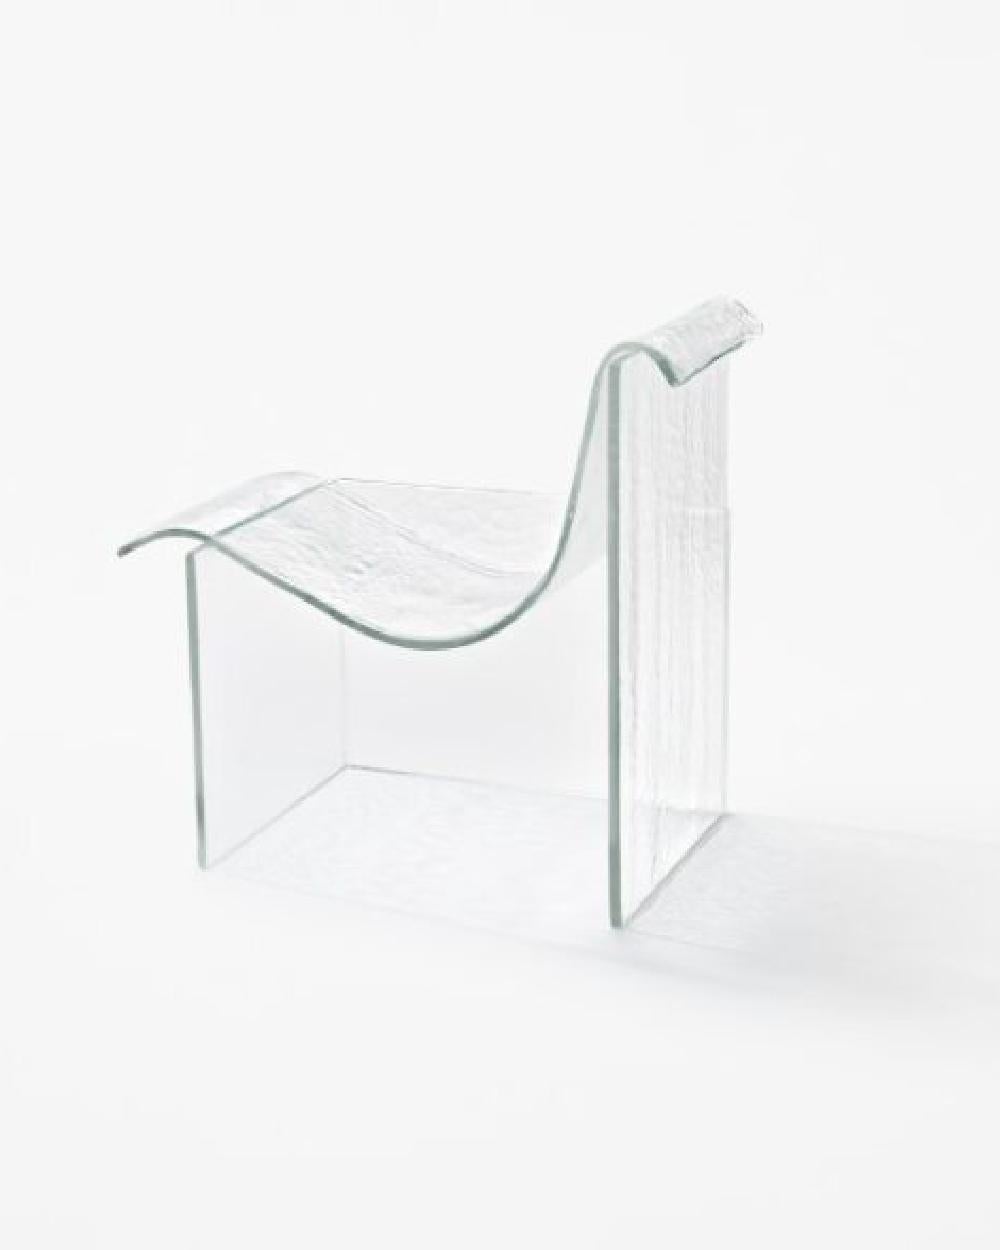 Melt is a collaboration with Japanese design studio, nendo, inspired by the flexibility of molten glass and the force of gravity. The creation of Melt was a unique and complex production. After watching the craftsmen working in WonderGlass’s